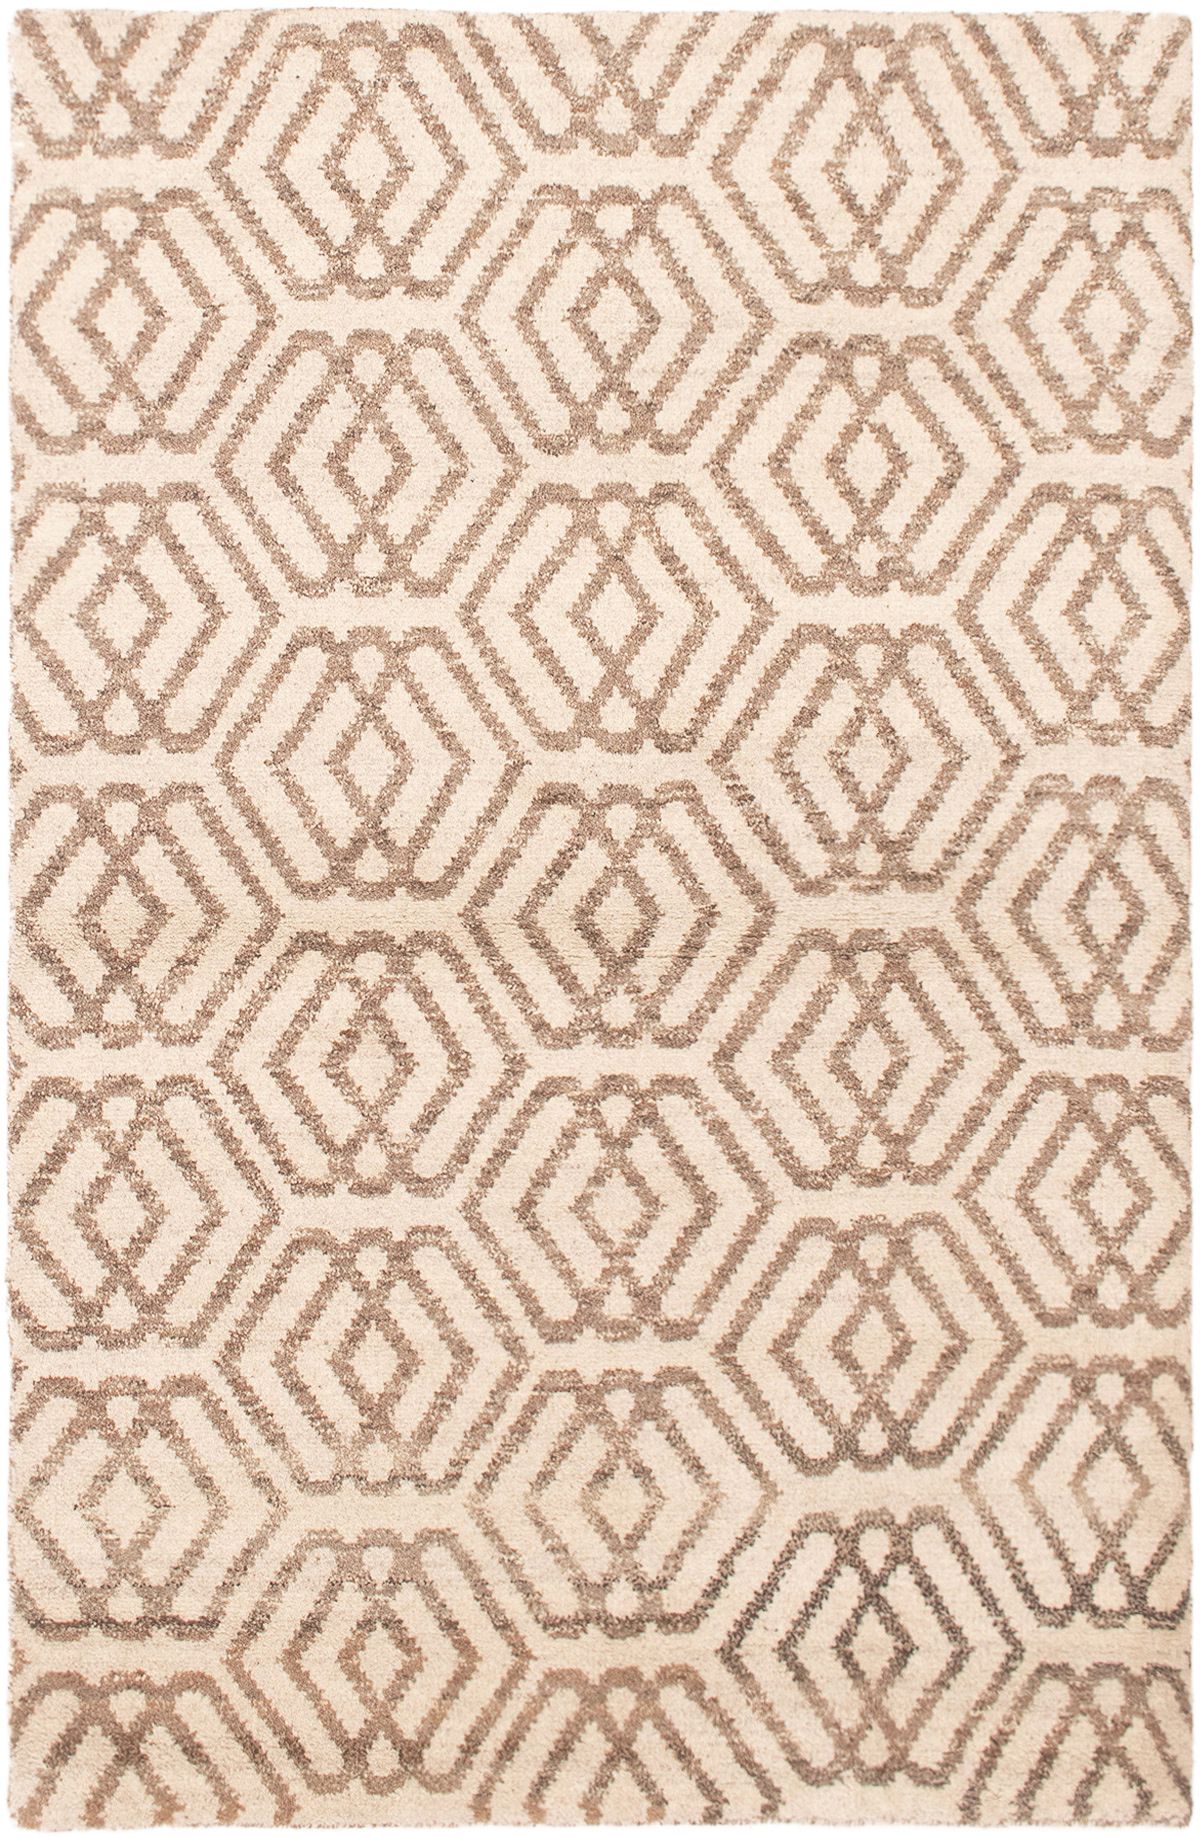 Hand-knotted Tangier Cream Wool Rug 5'2" x 7'11" Size: 5'2" x 7'11"  